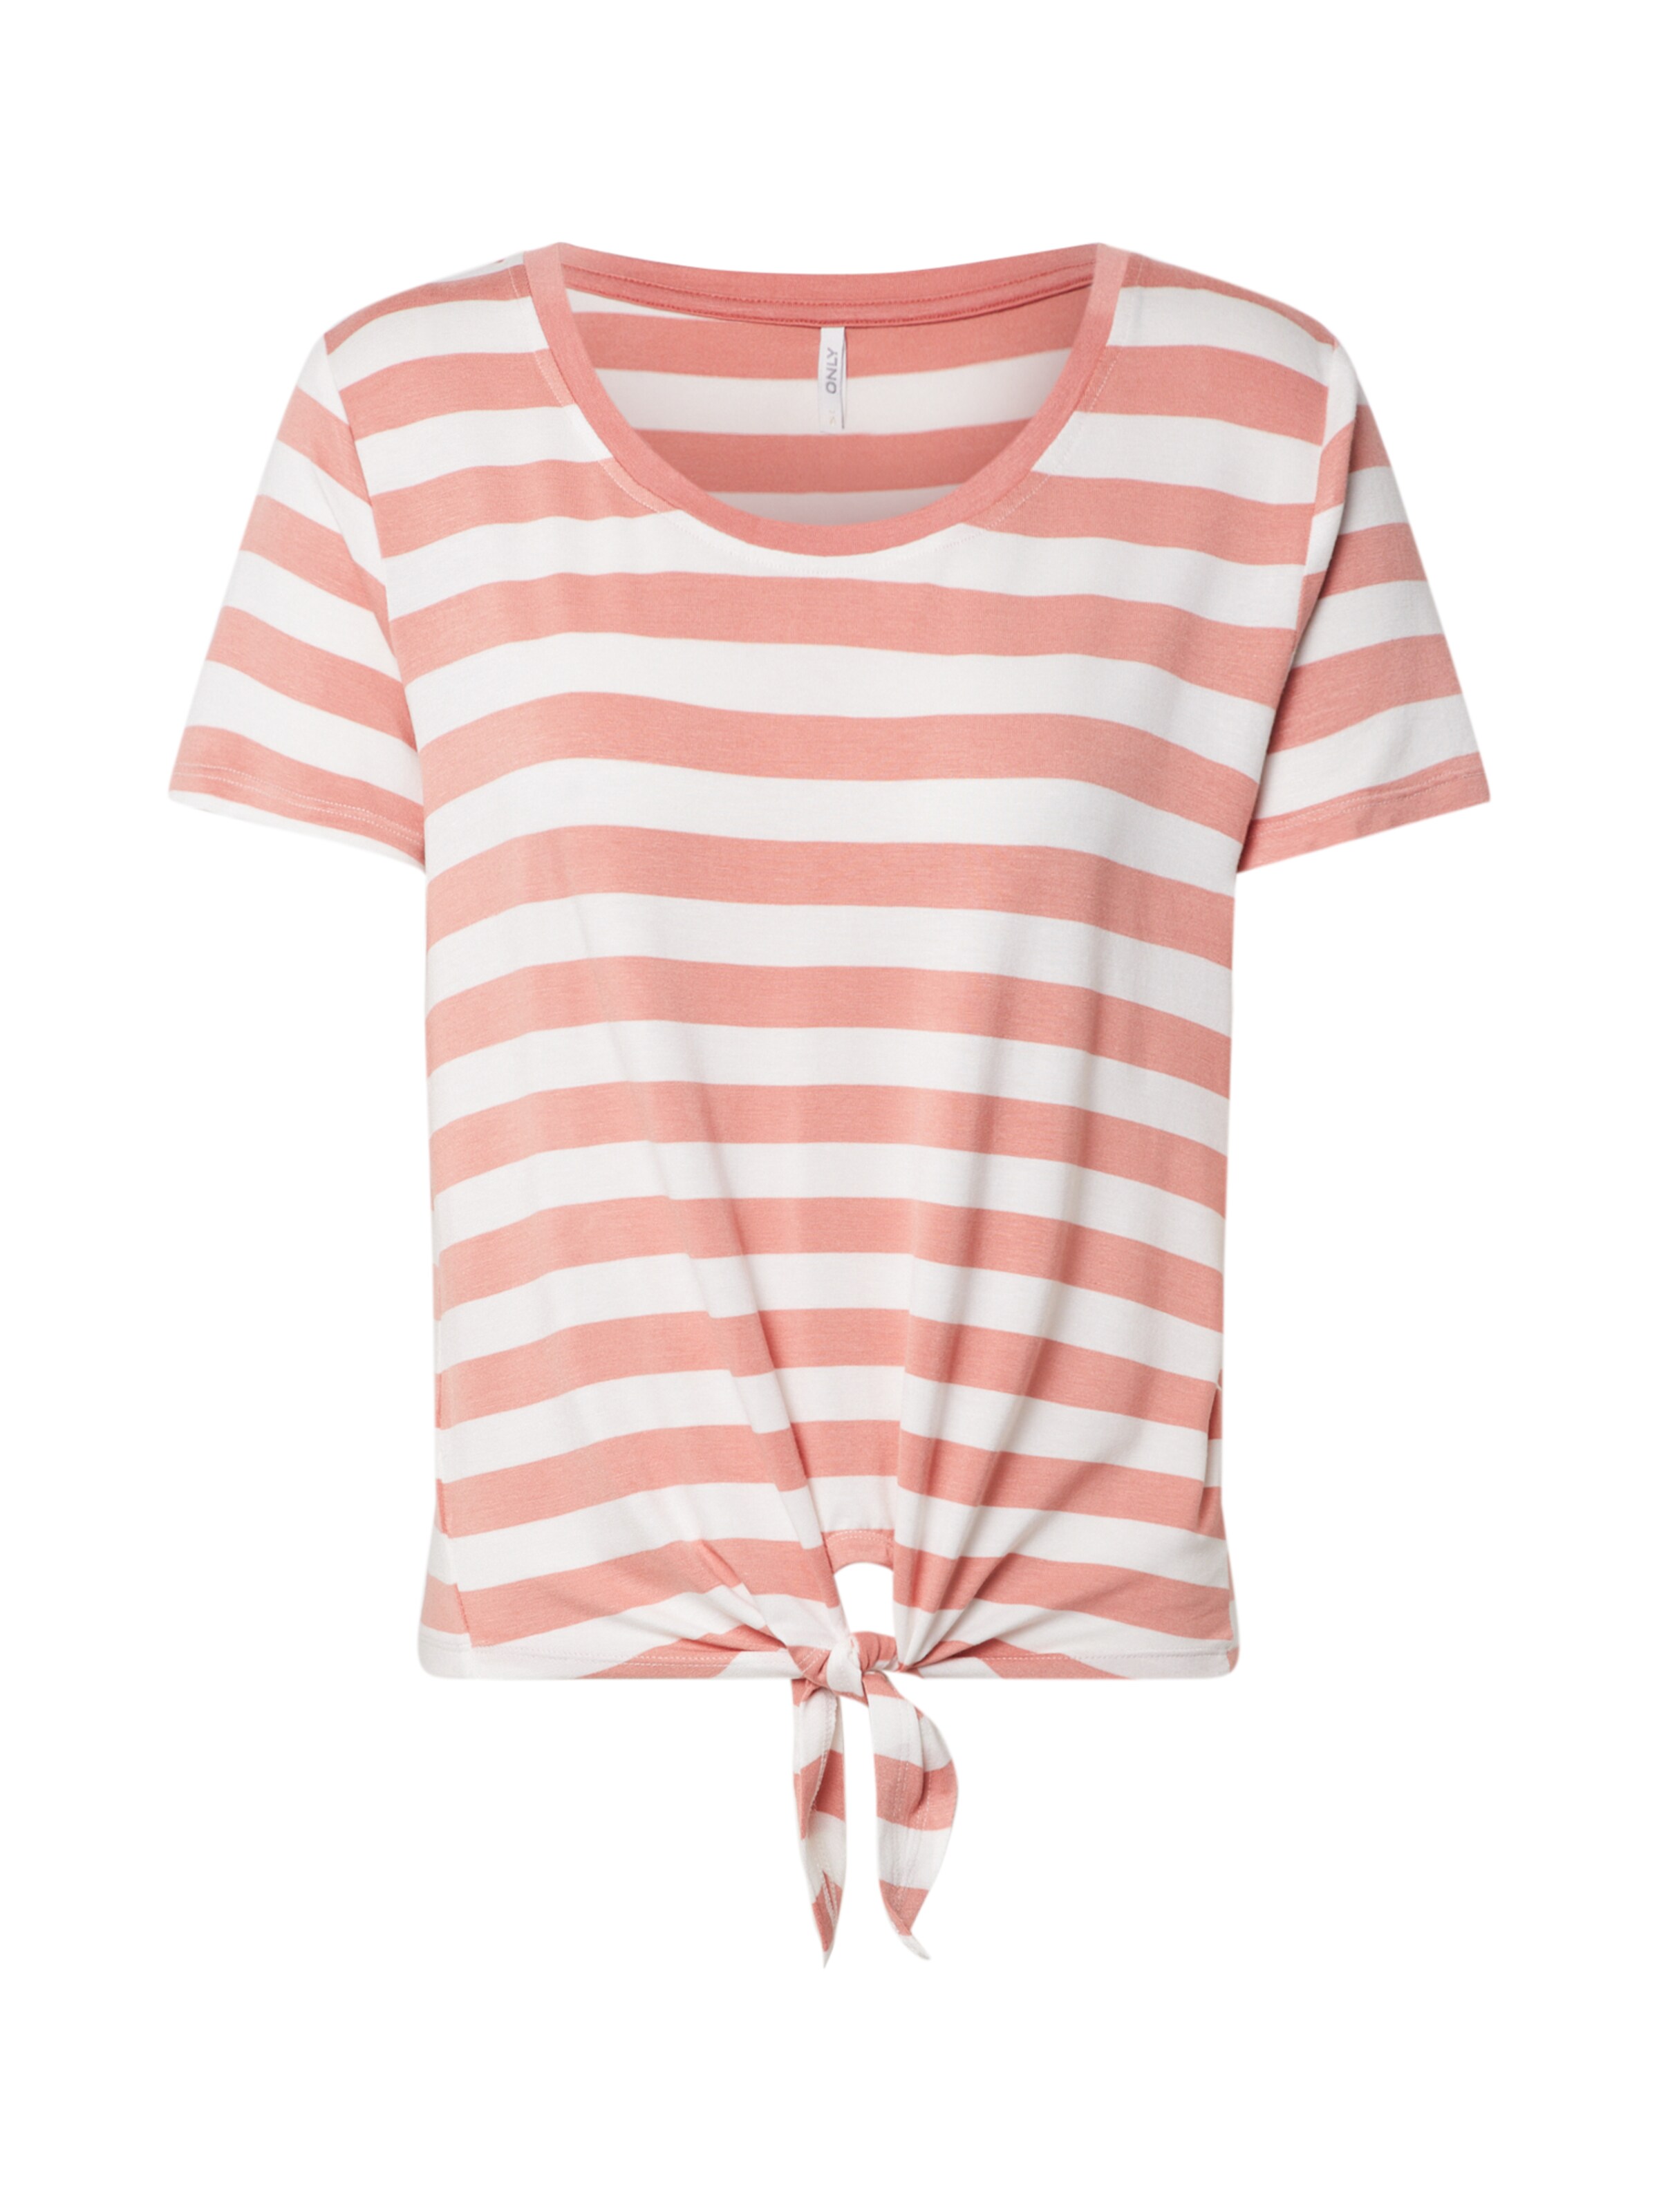 Frauen Shirts & Tops ONLY Shirt in Rosa, Offwhite - UA07685